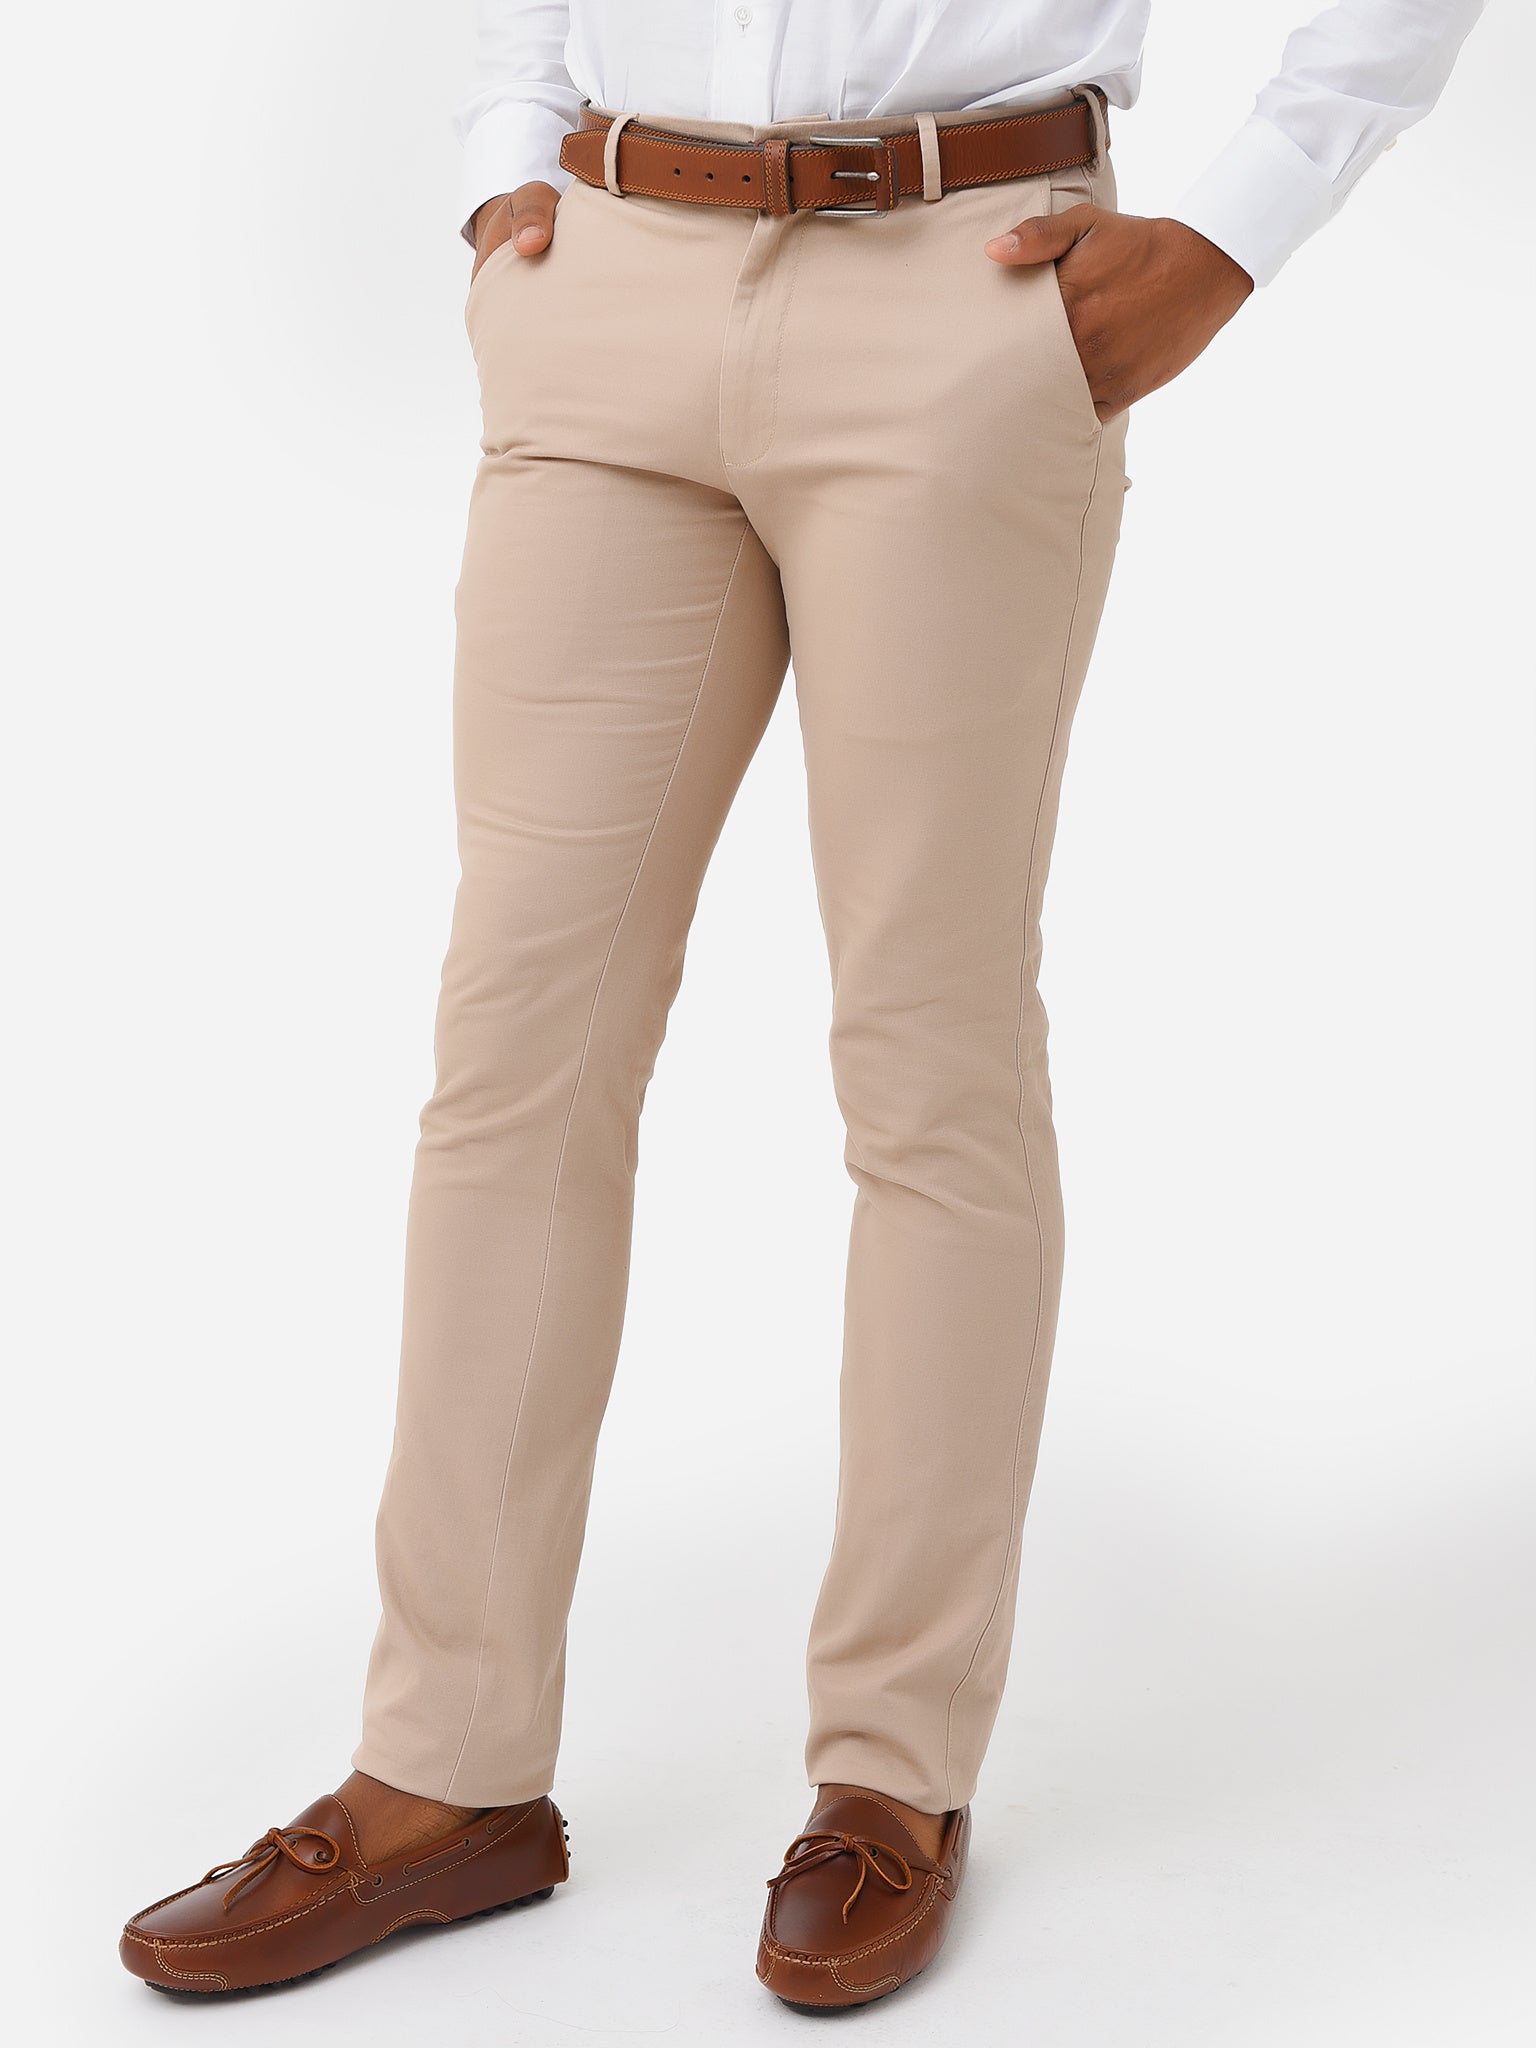 Twill Khaki Pants & More Colors from Vintage 1946